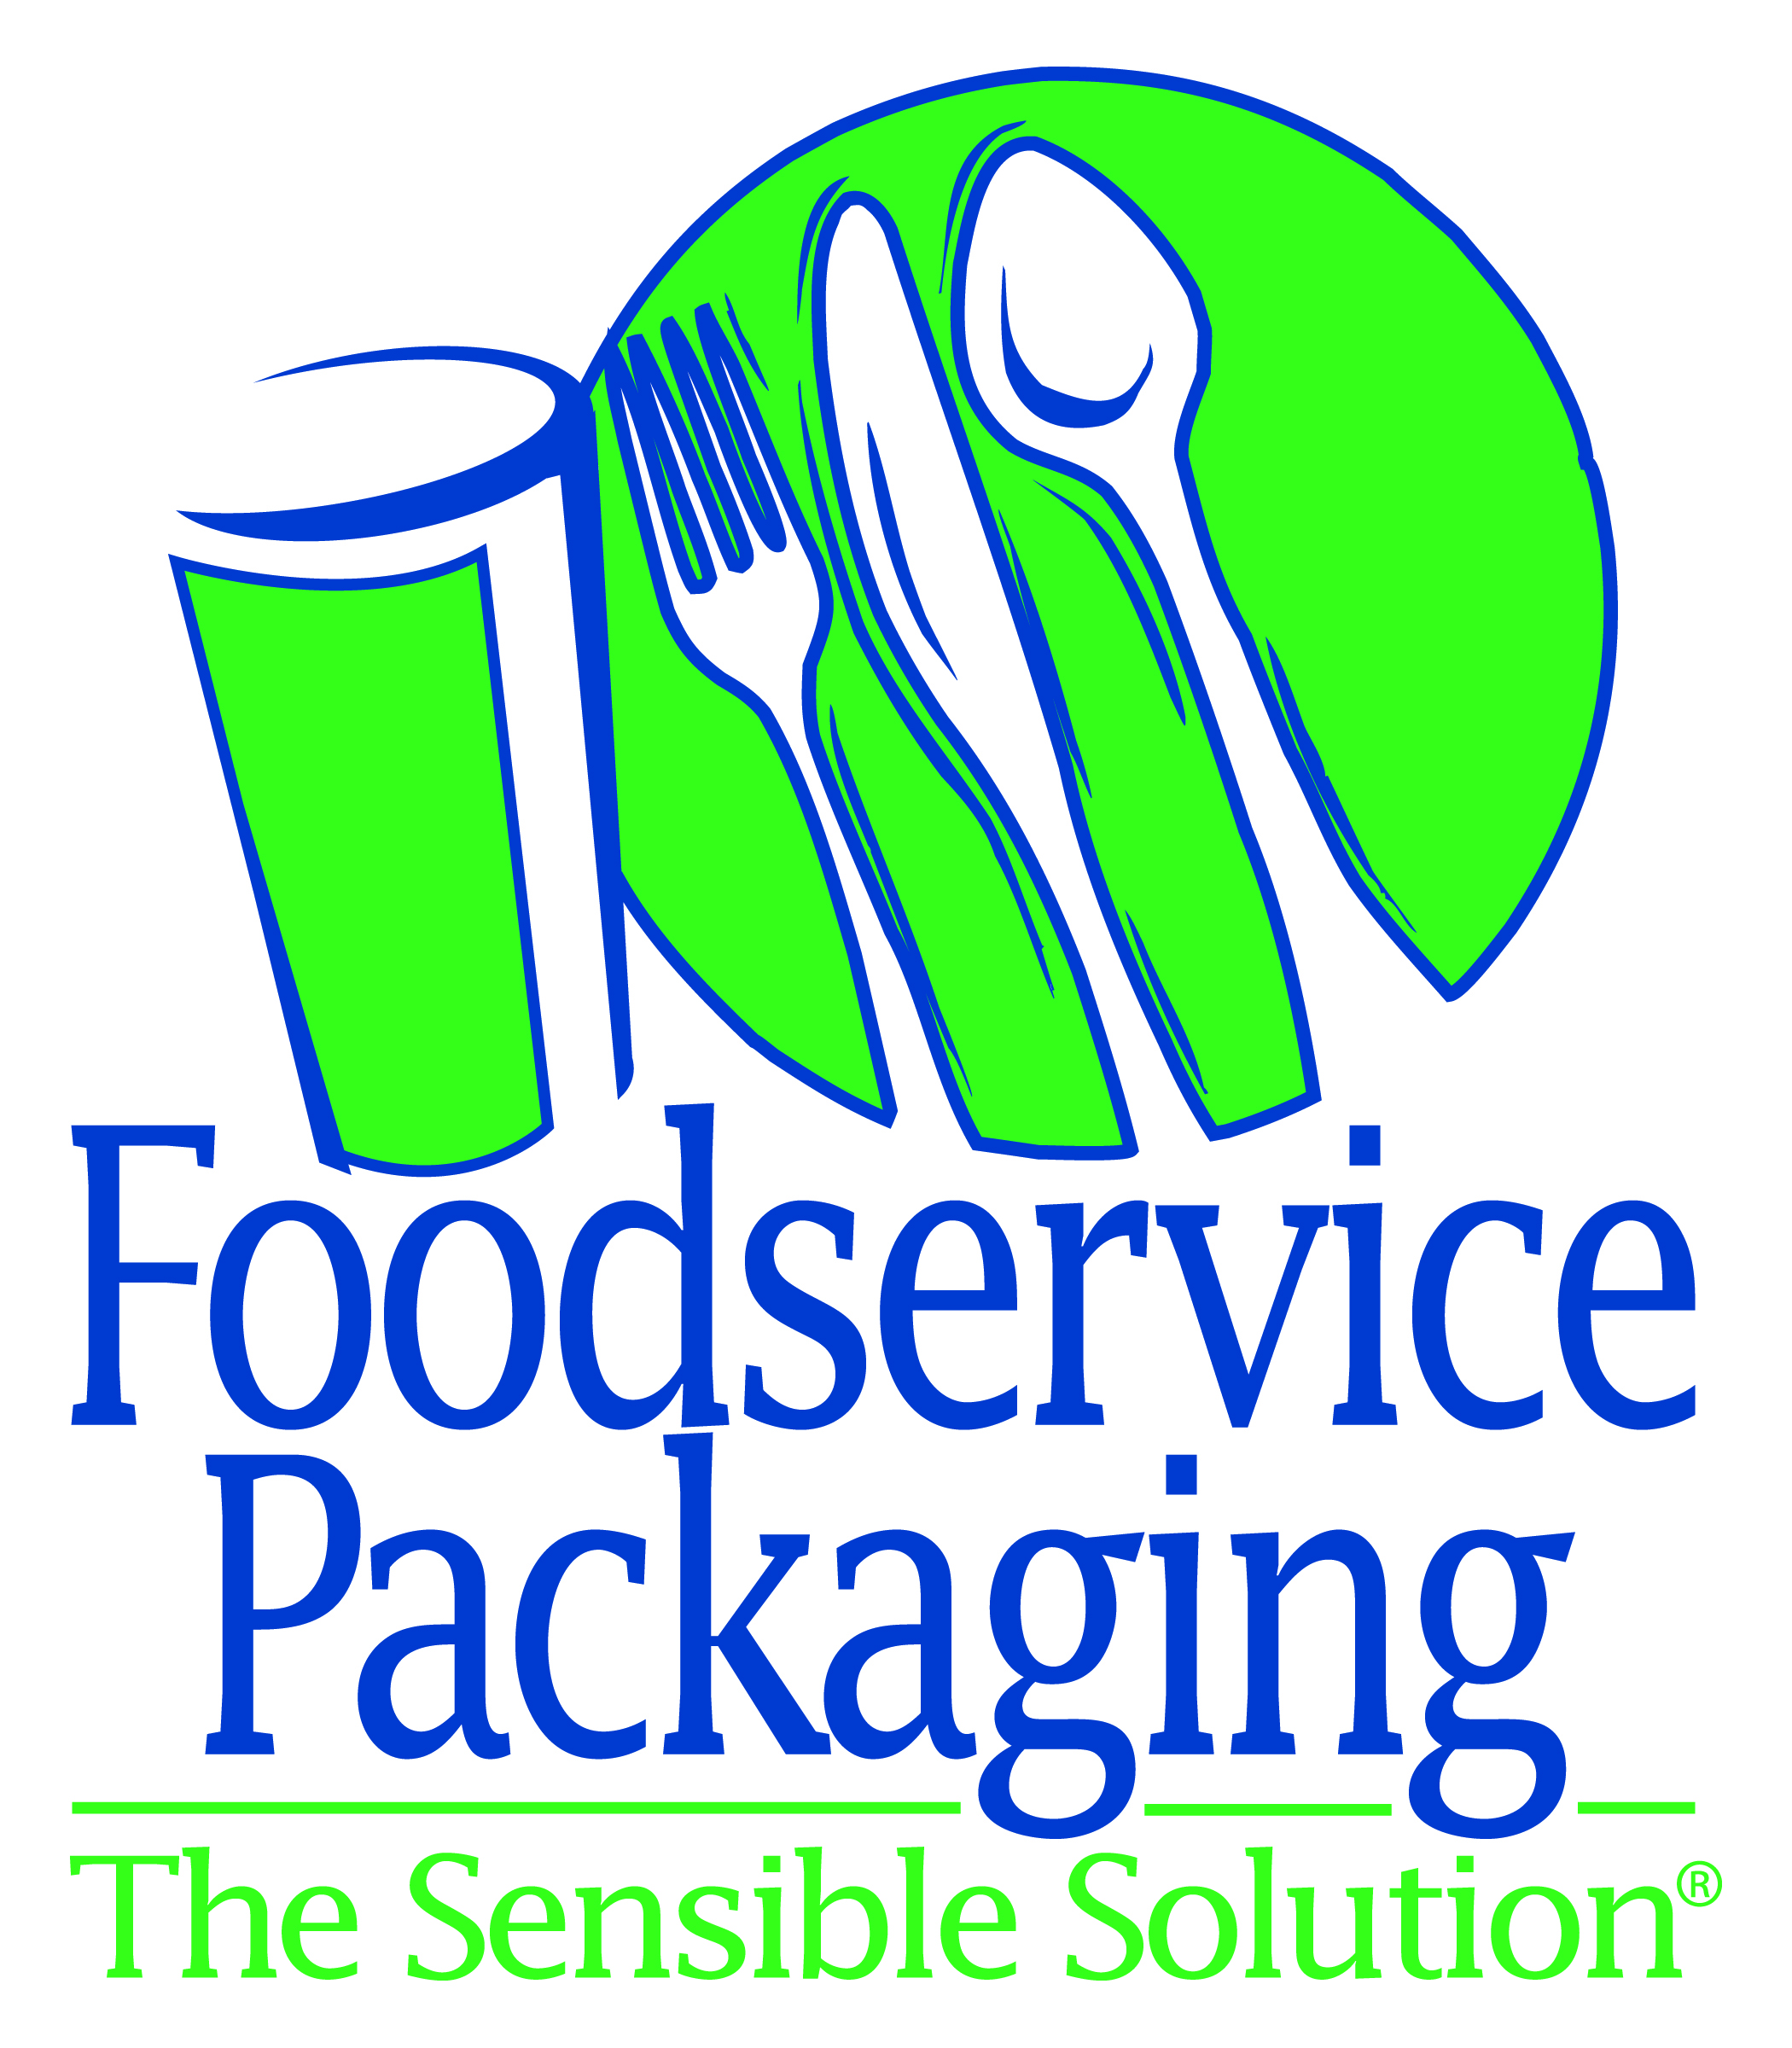 FPI encourages the responsible use of all foodservice packaging through promotion of its benefits and members’ products.